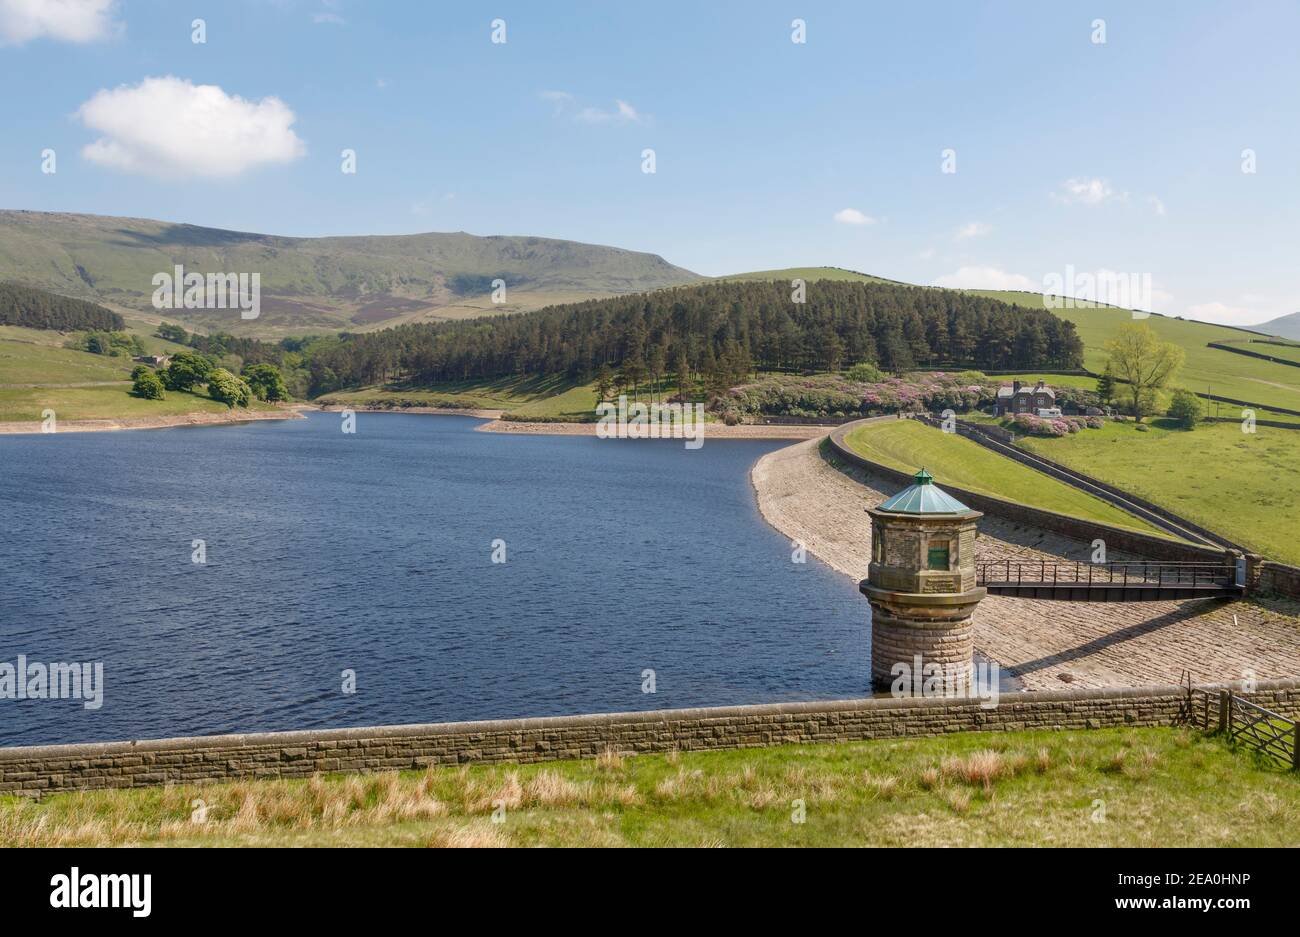 Kinder Reservoir, a water storage reservoir for drinking water in Peak District, Derbyshire, UK. Kinder Scout moorland in the background Stock Photo